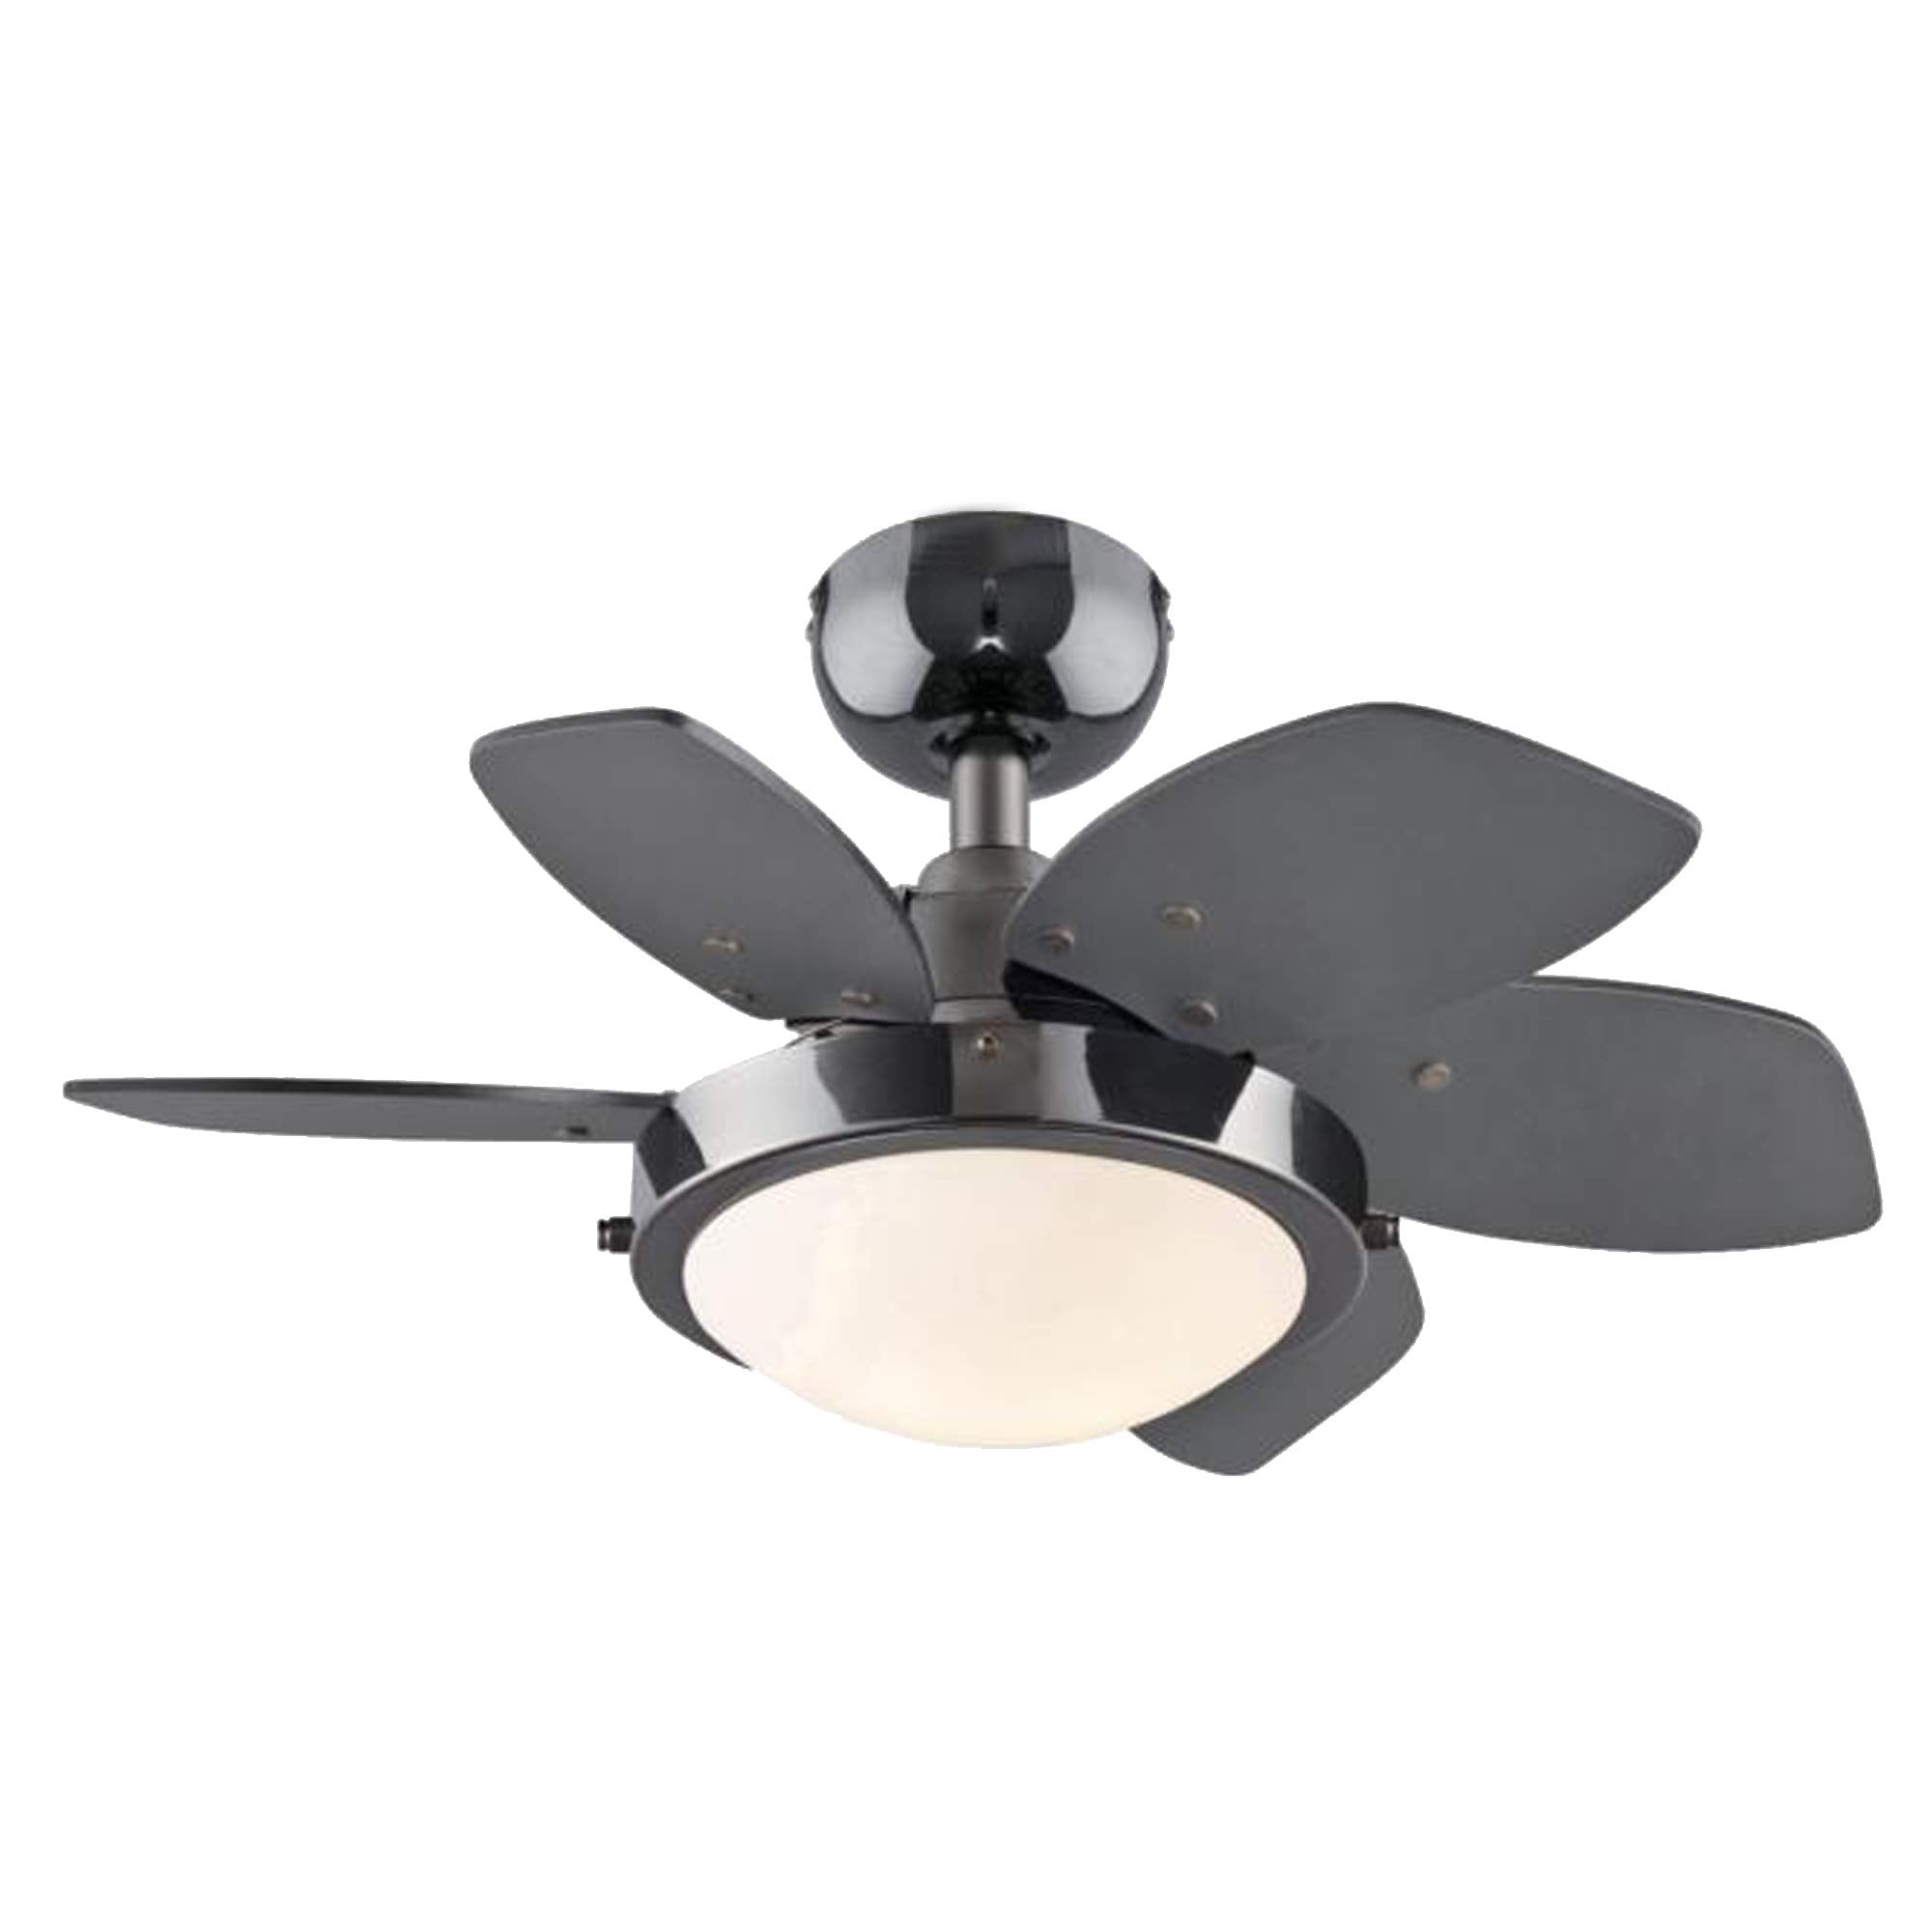 Ciata Lighting 24 Inch Quince Indoor Ceiling Fan with Dimmable LED Light Fixture in Opal Frosted Glass with Reversible Blades  - Like New